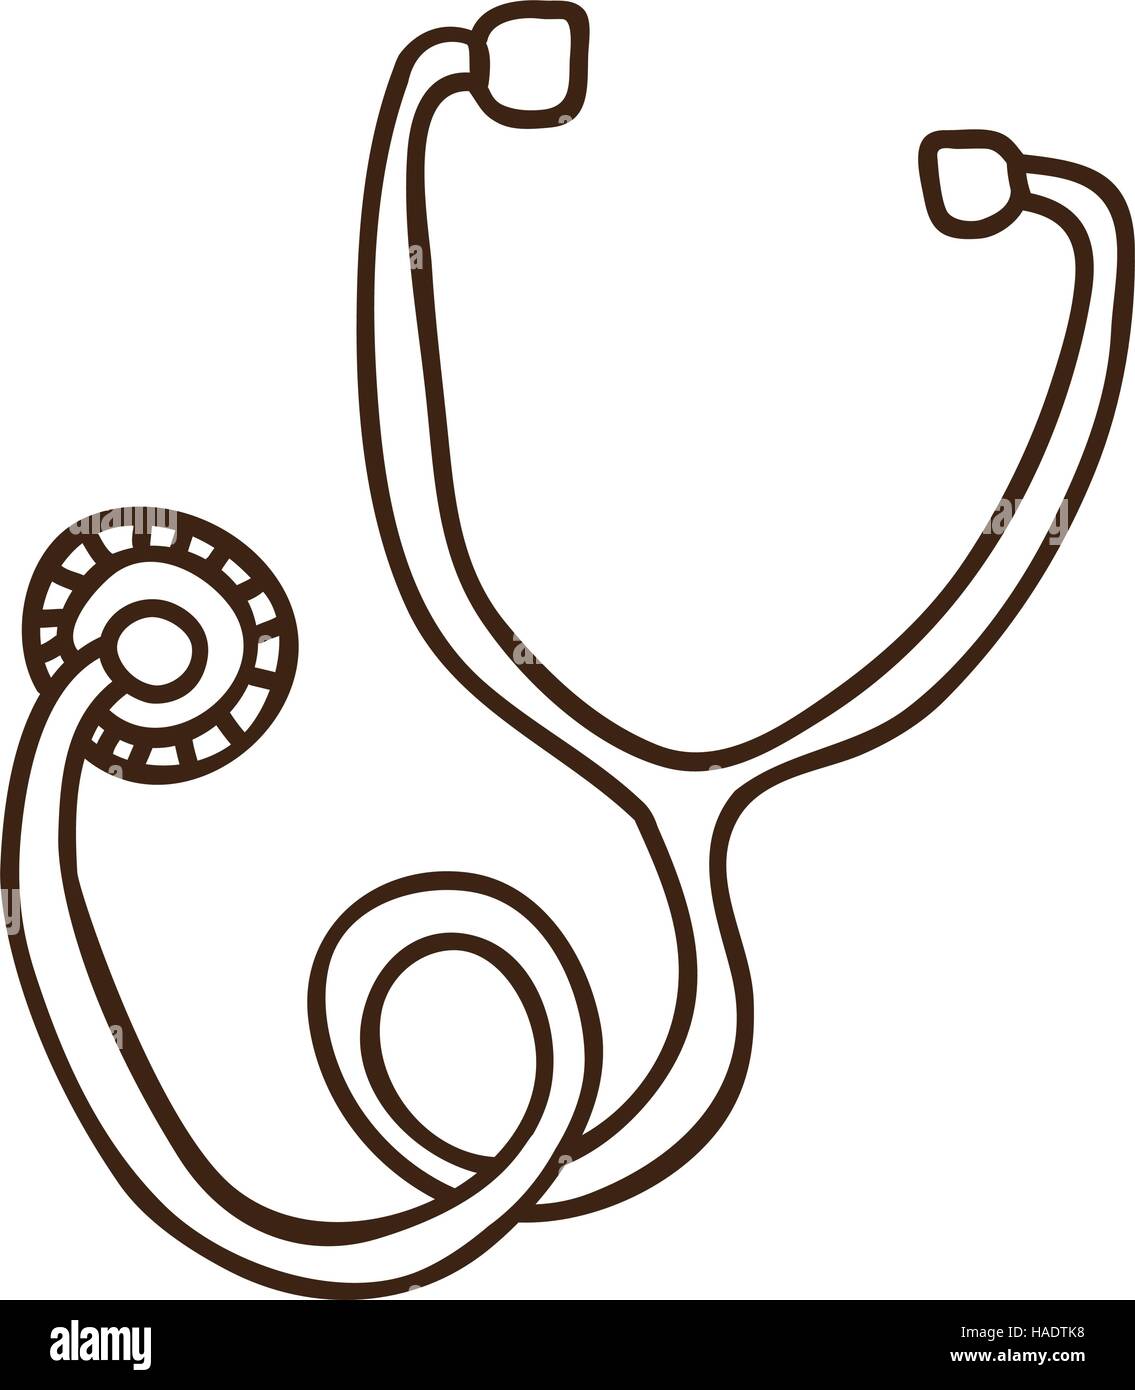 silhouette stethoscope medical with auriculars vector illustration Stock Vector